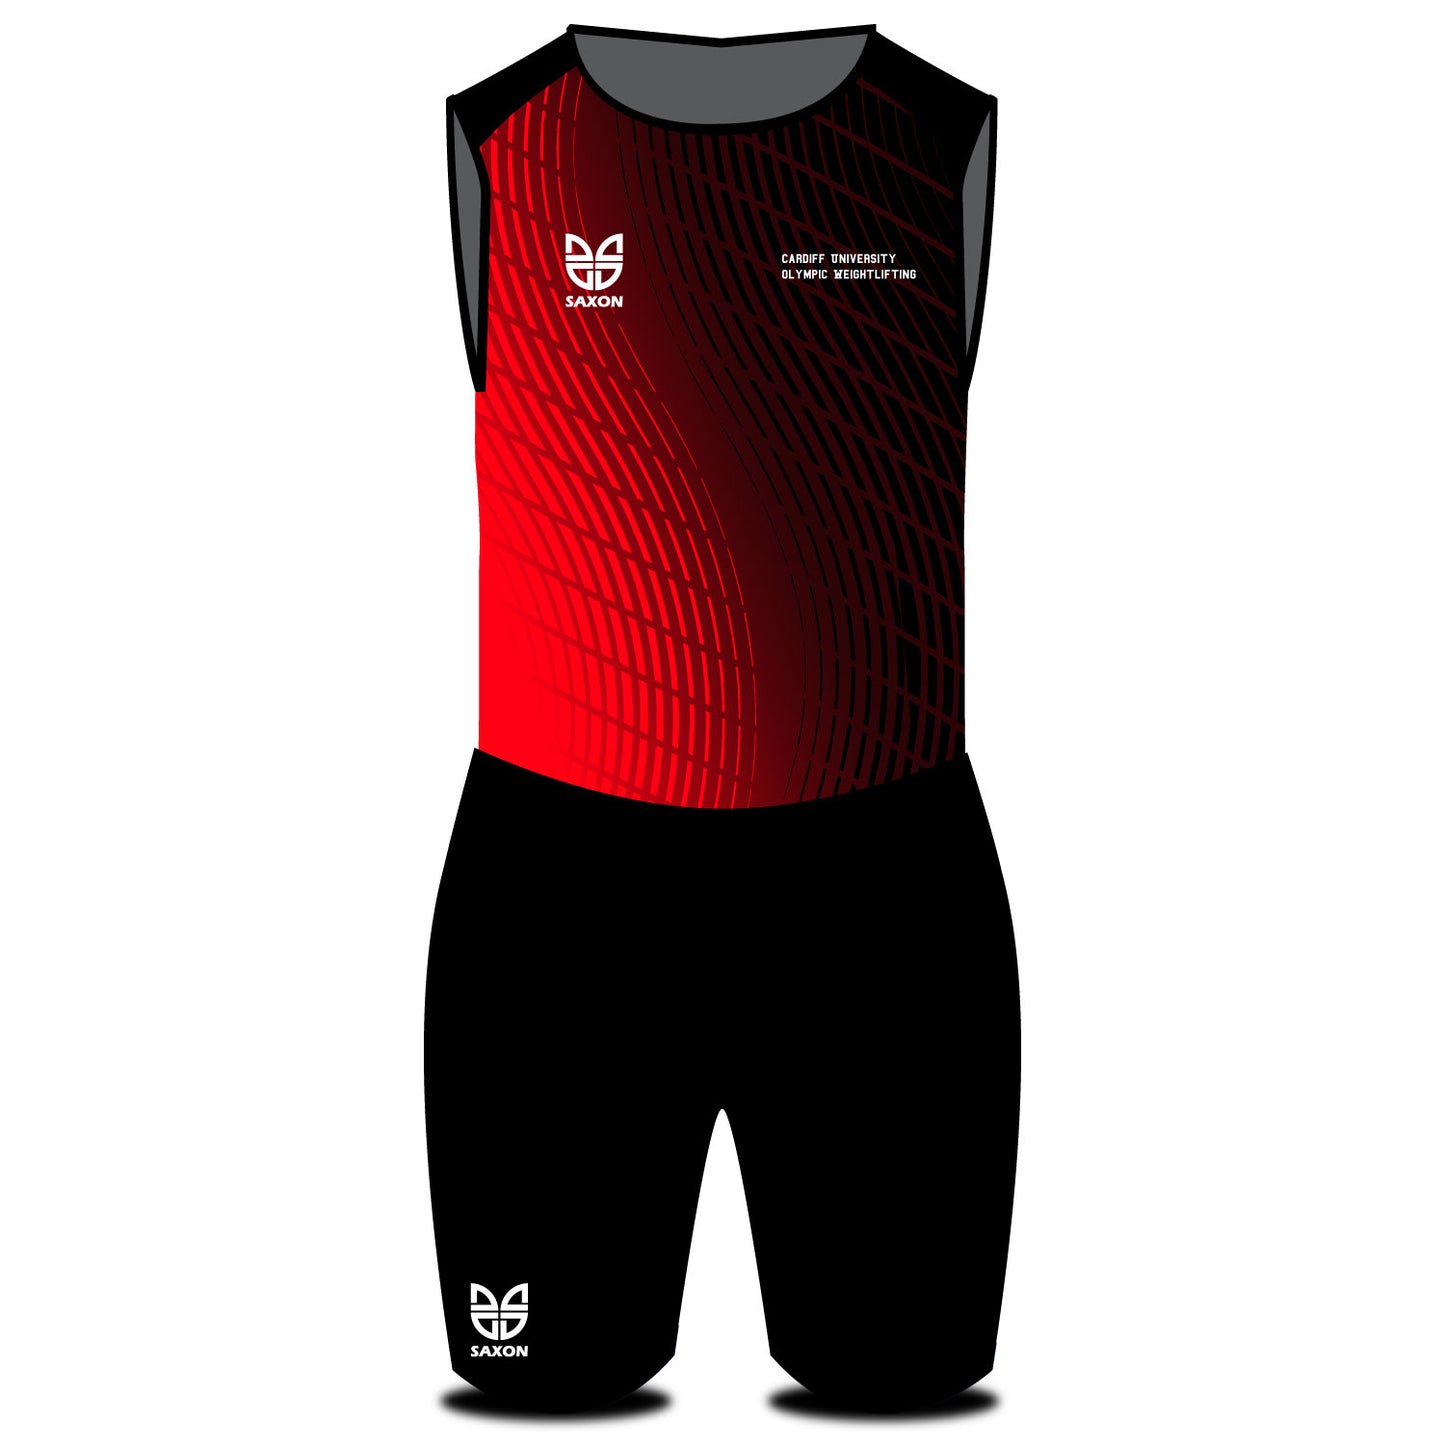 Cardiff University Olympic Weightlifting Suit